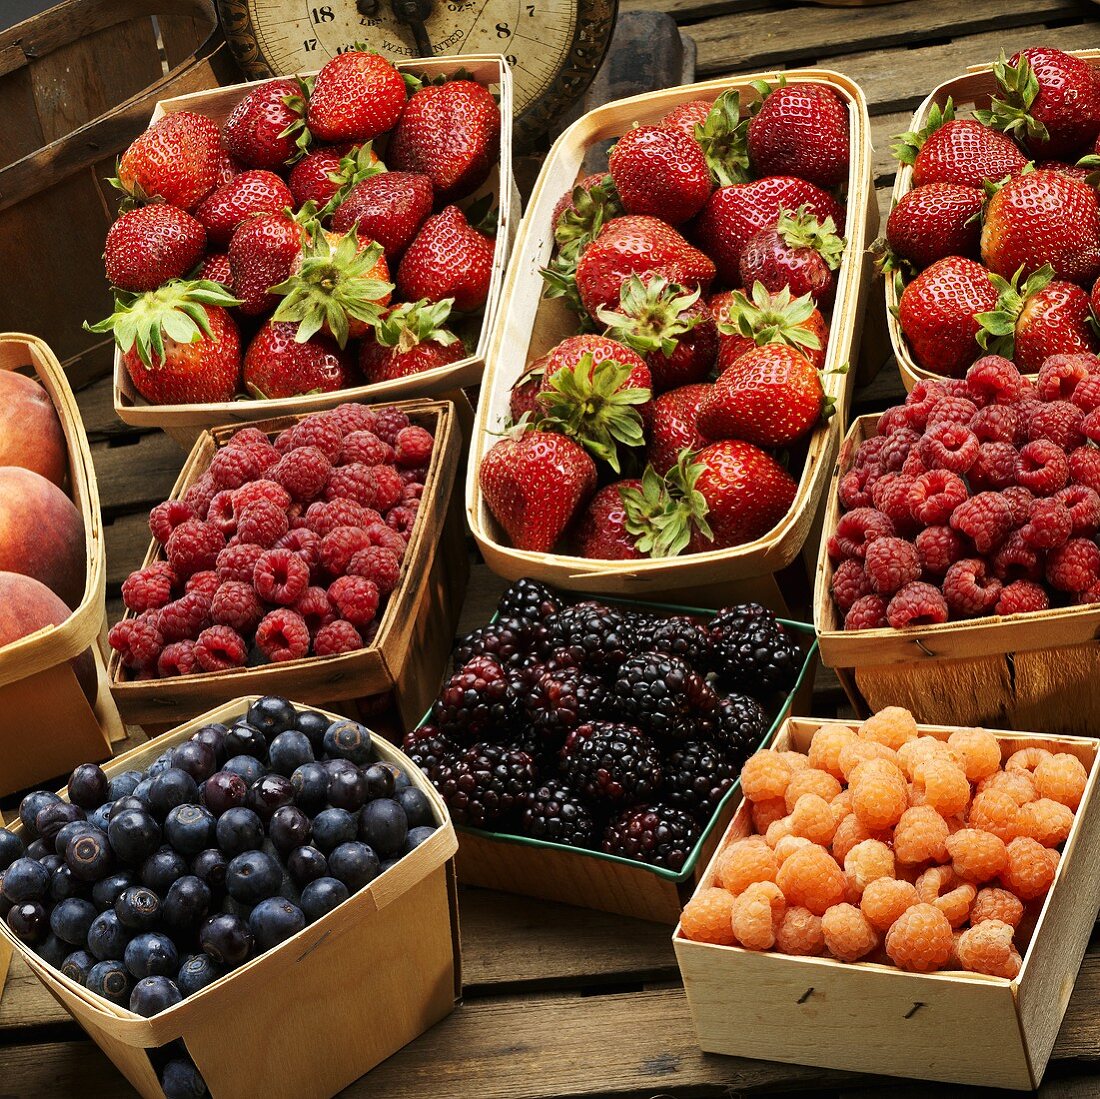 Many Baskets of Fresh Assorted Berries; Scale